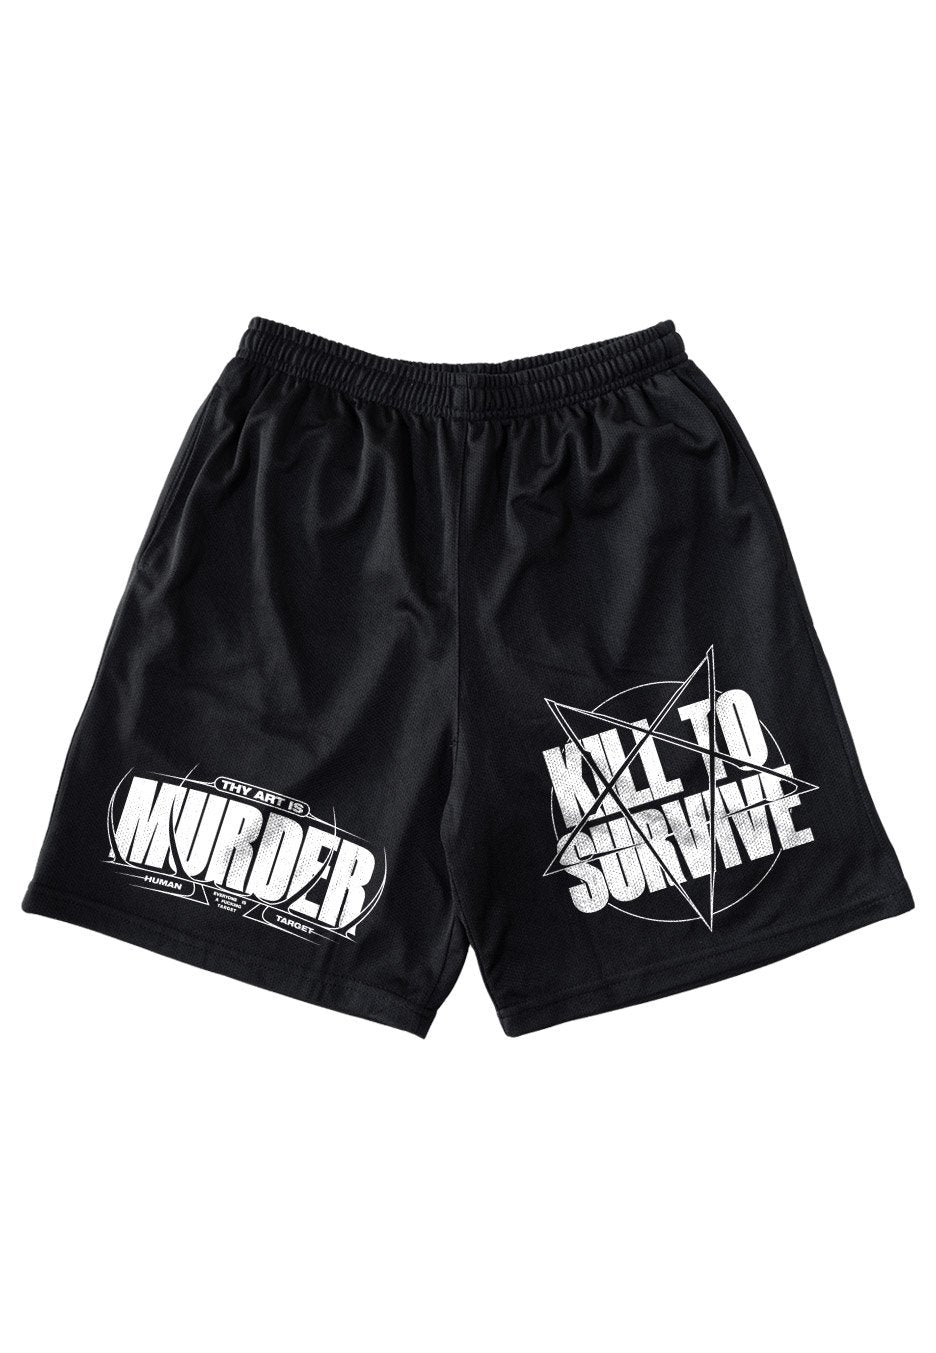 Thy Art Is Murder - Kill To Survive - Shorts